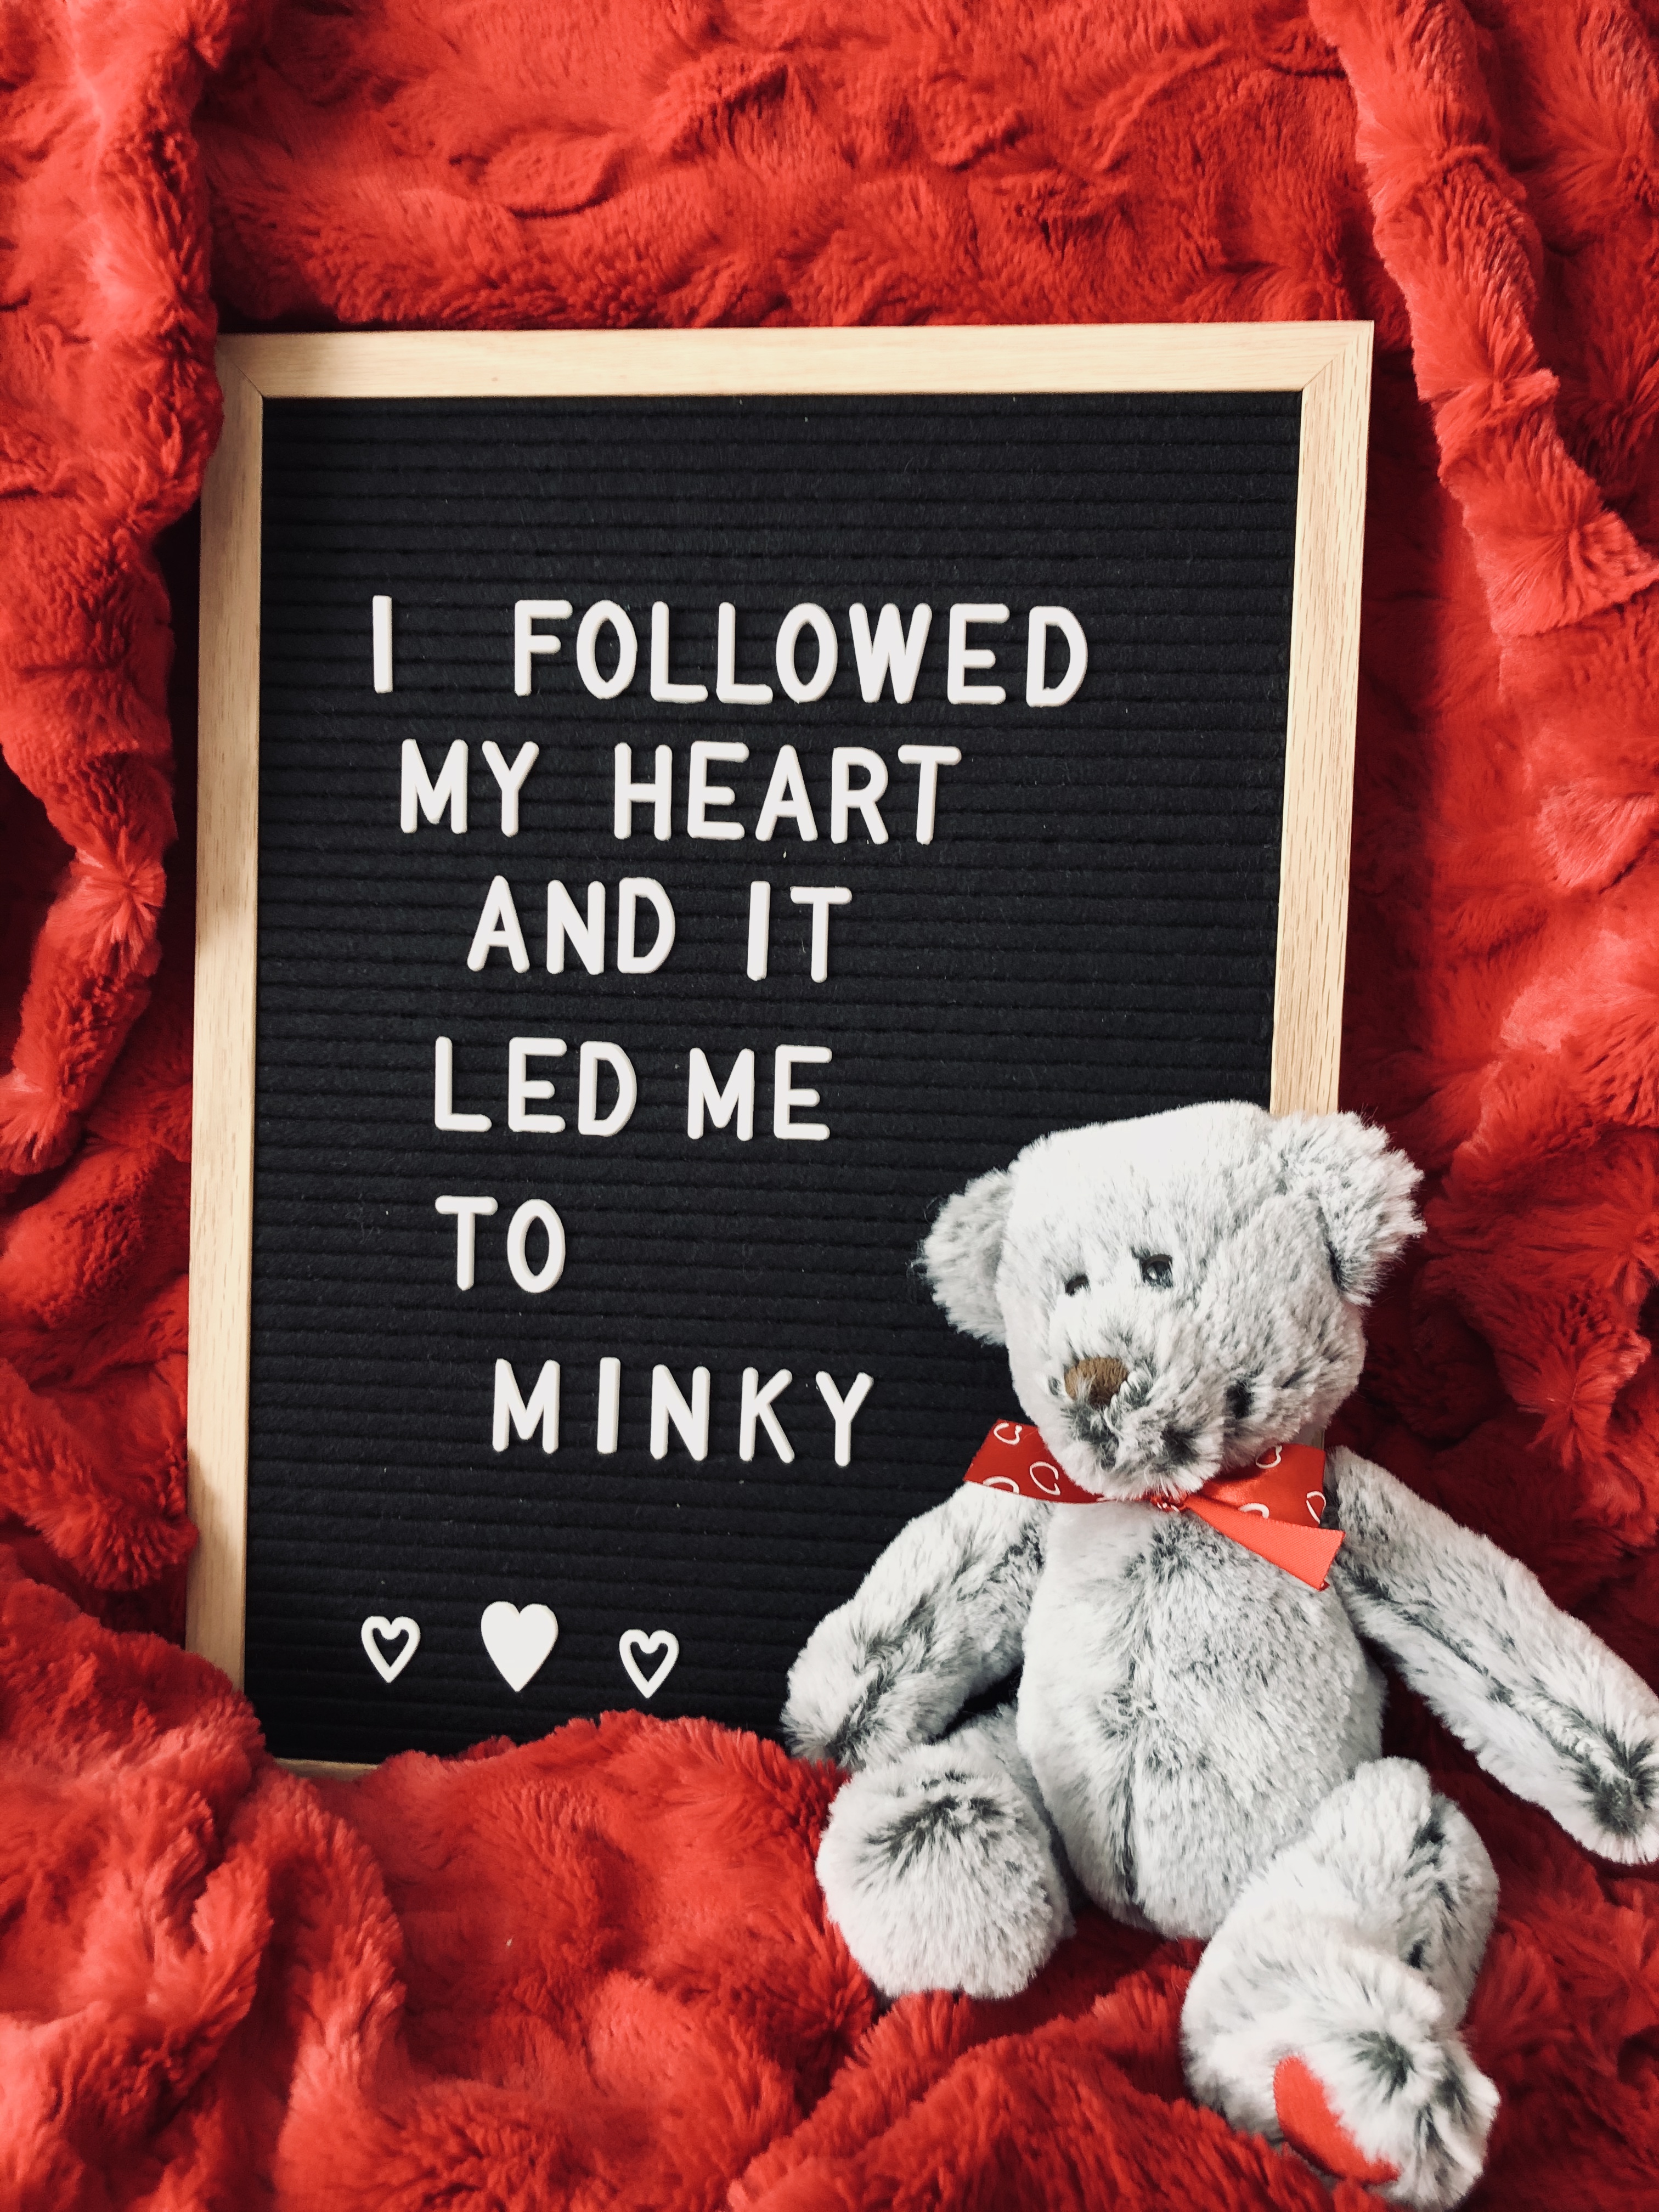 5 Love Quotes For Your Letter Board